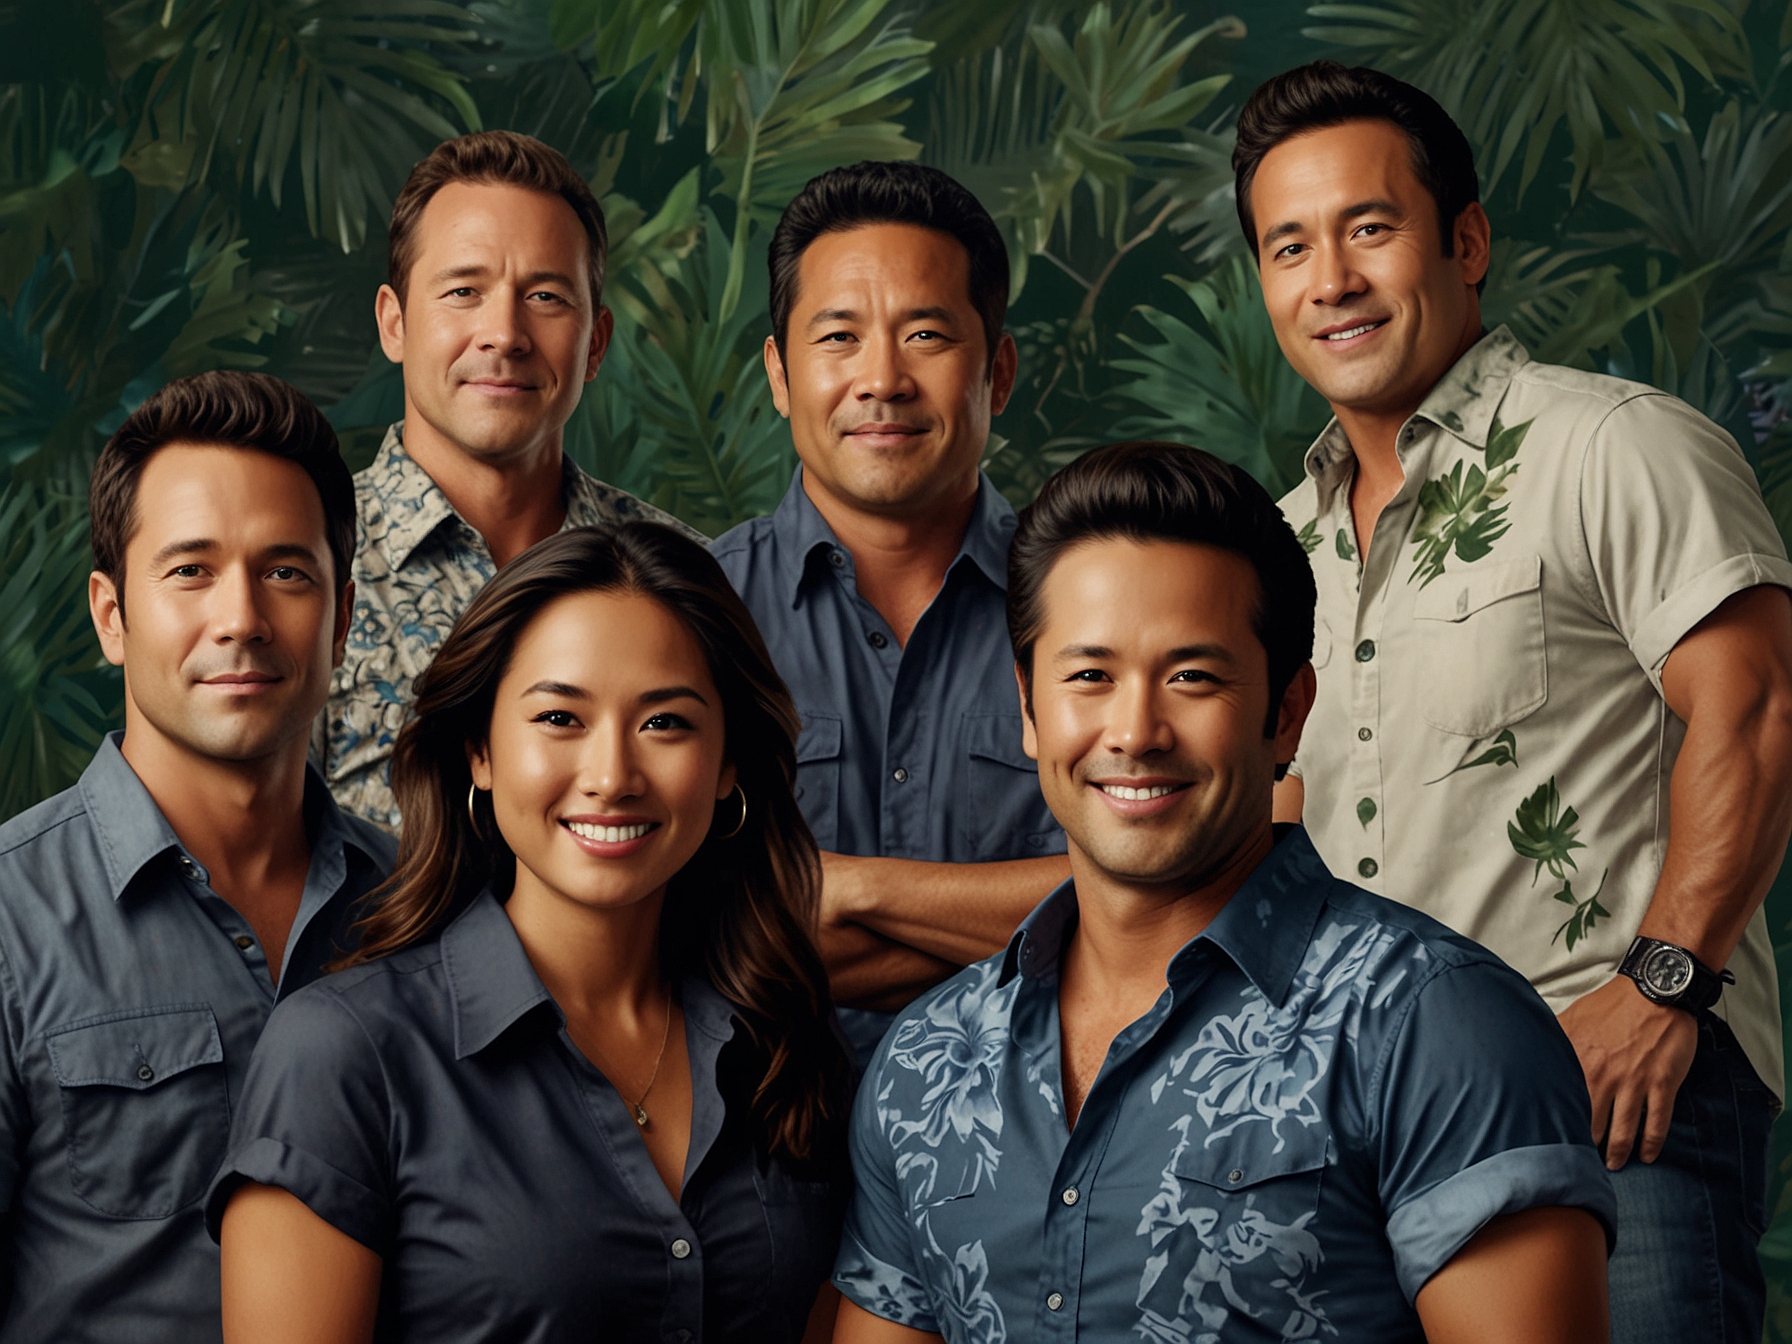 A cast and crew photo of 'Hawaii Five-0' with Taylor Wily front and center, capturing the deep bond and 'ohana spirit that the team shared, honoring Wily's lasting impact on the show.